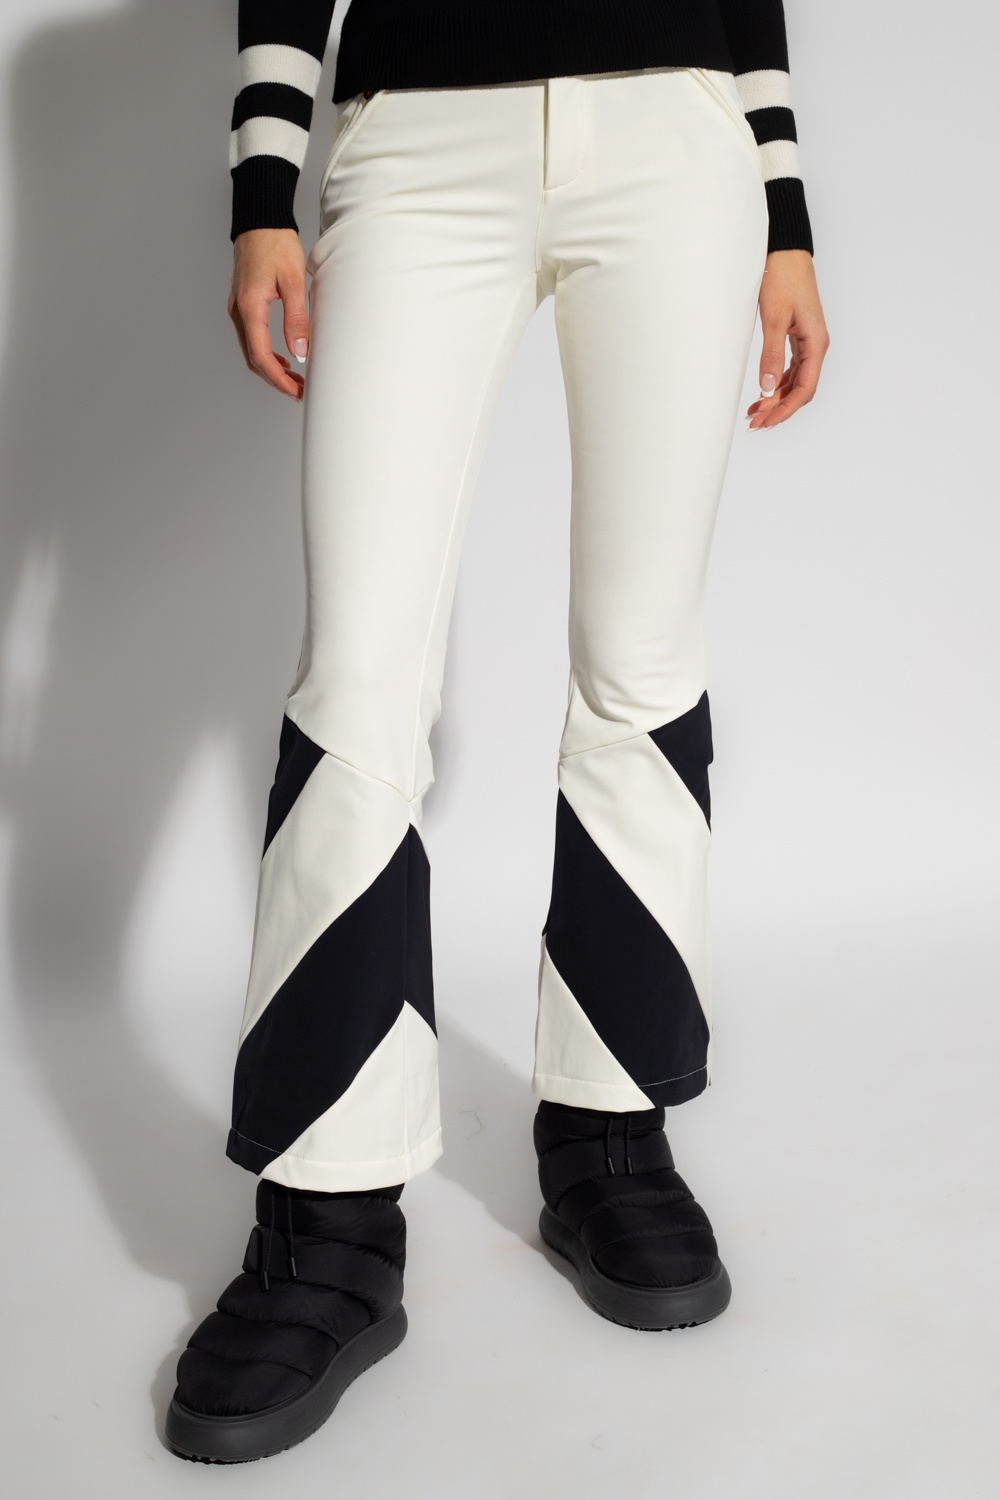 Perfect Moment Ski lucile trousers